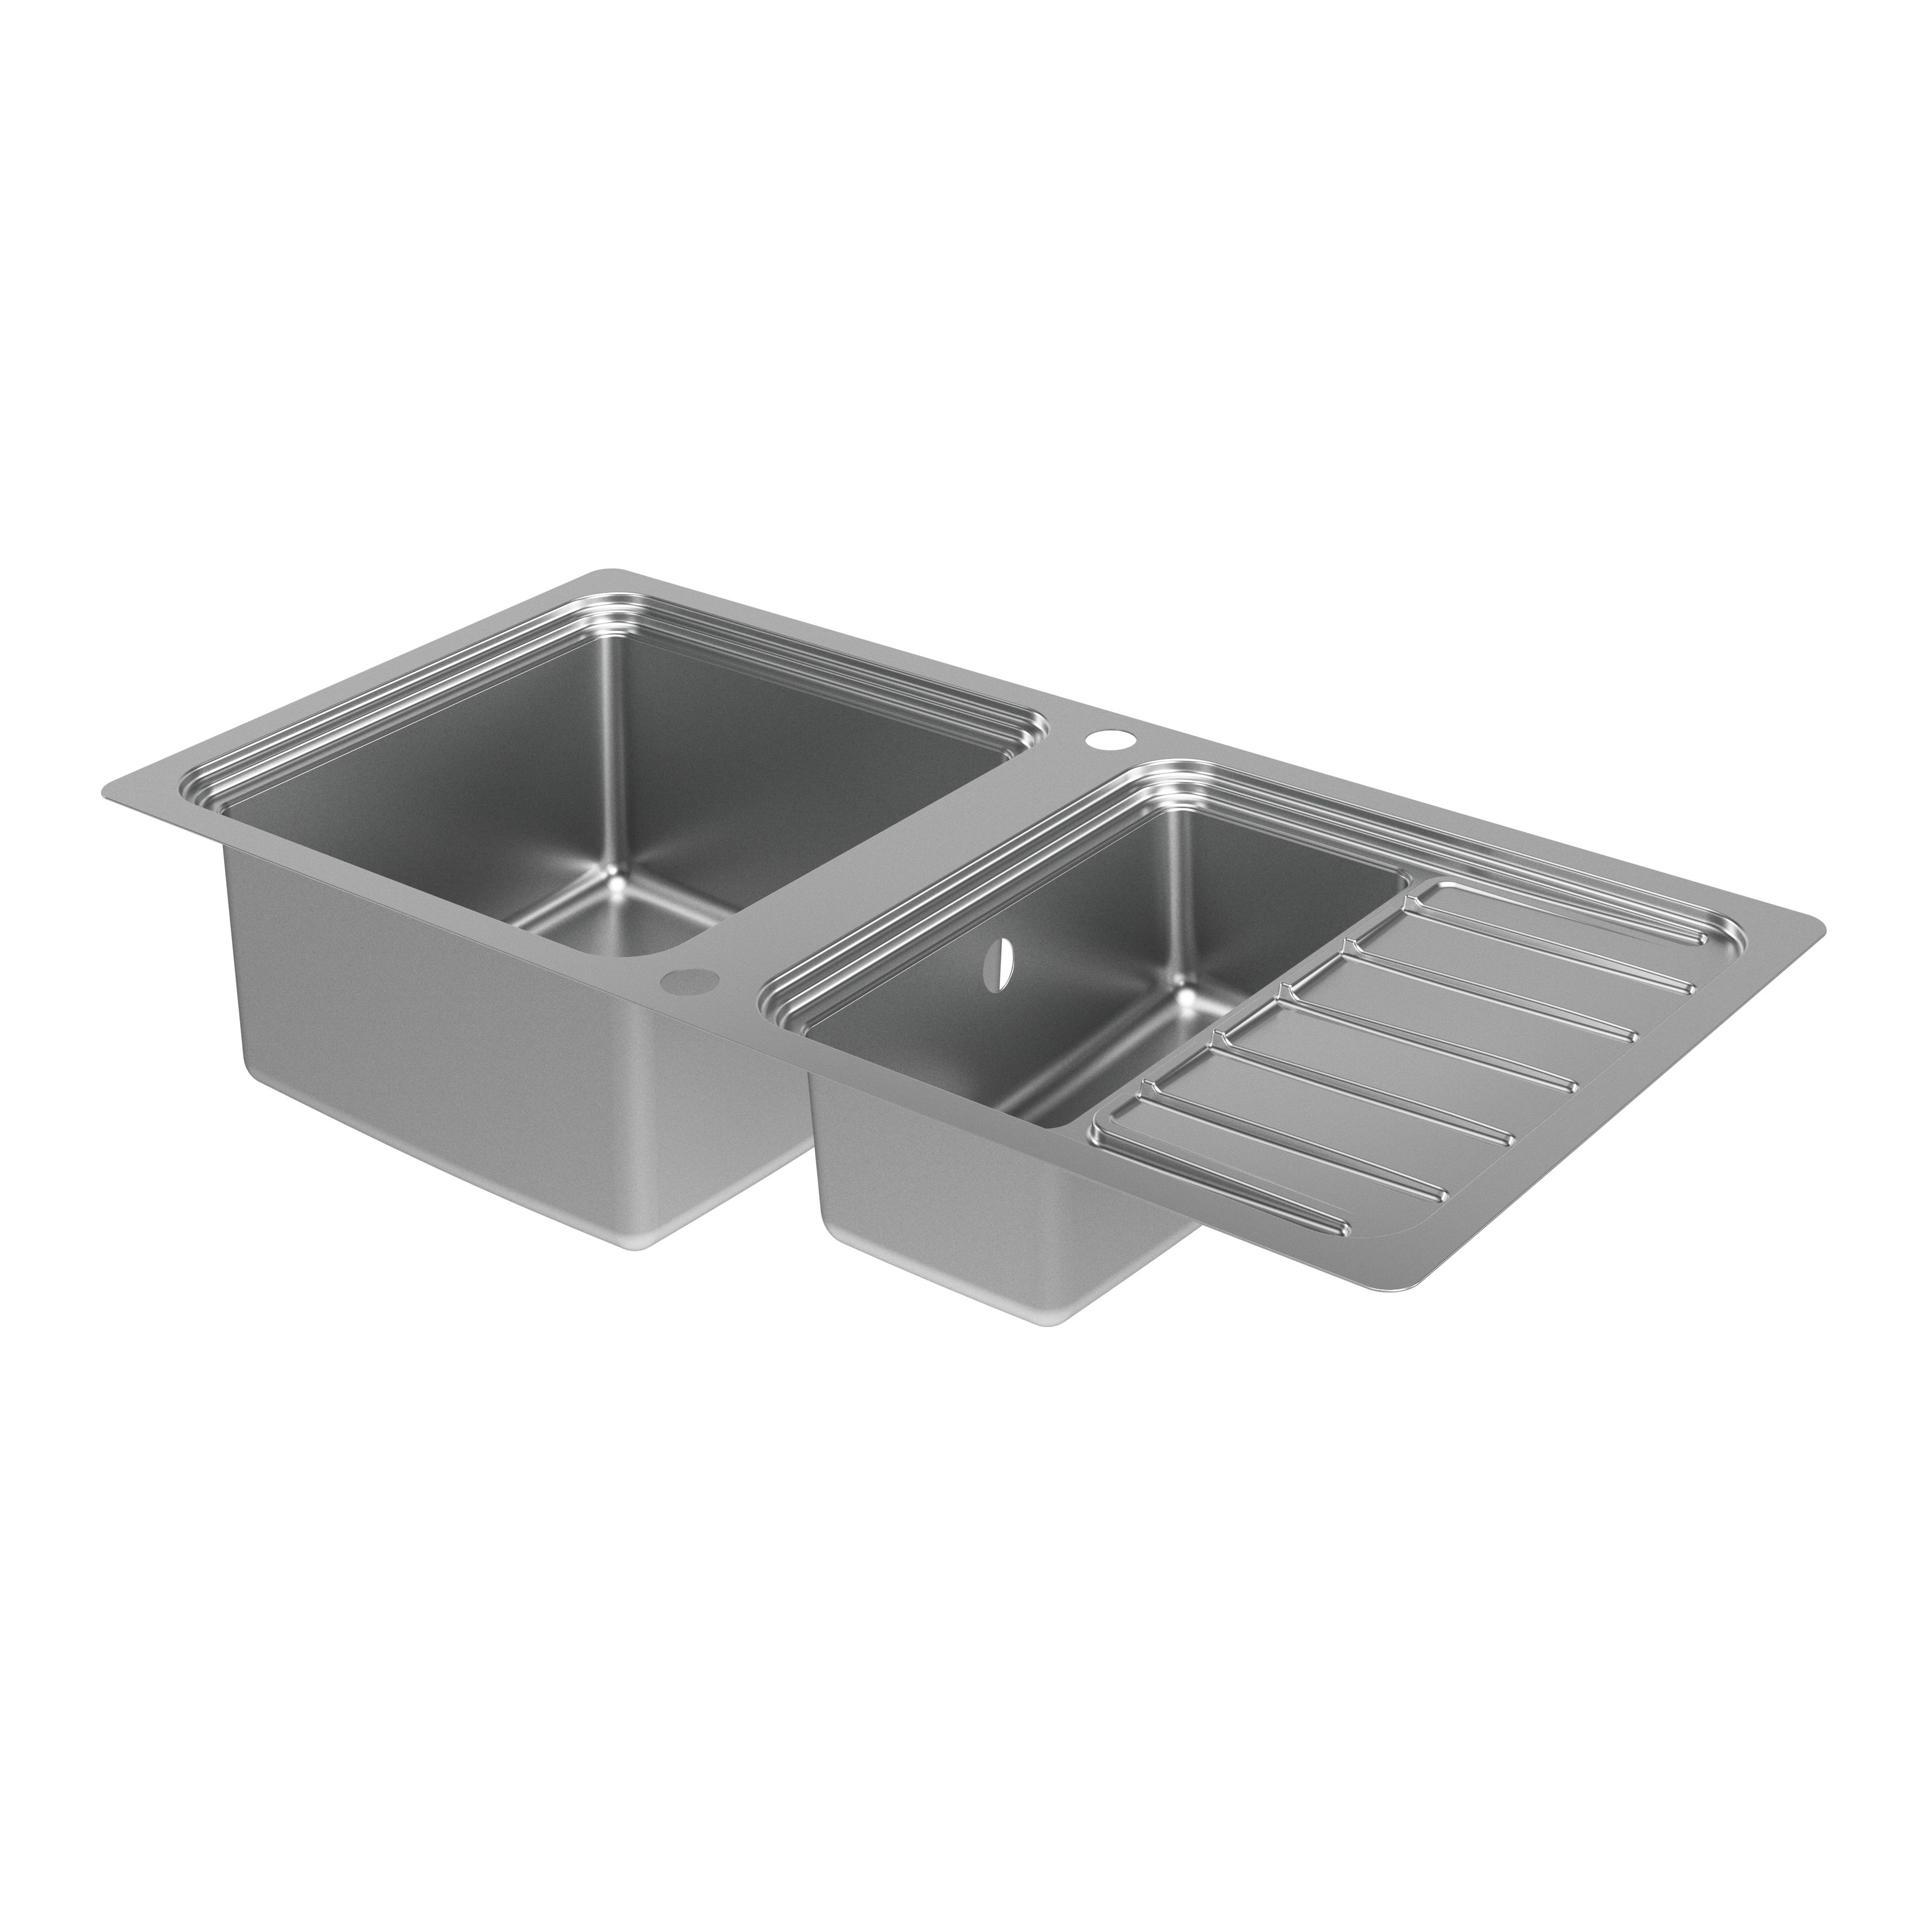 GoodHome Romesco Brushed Stainless steel 1.5 Bowl Kitchen sink With compact drainer 510mm x 1050mm